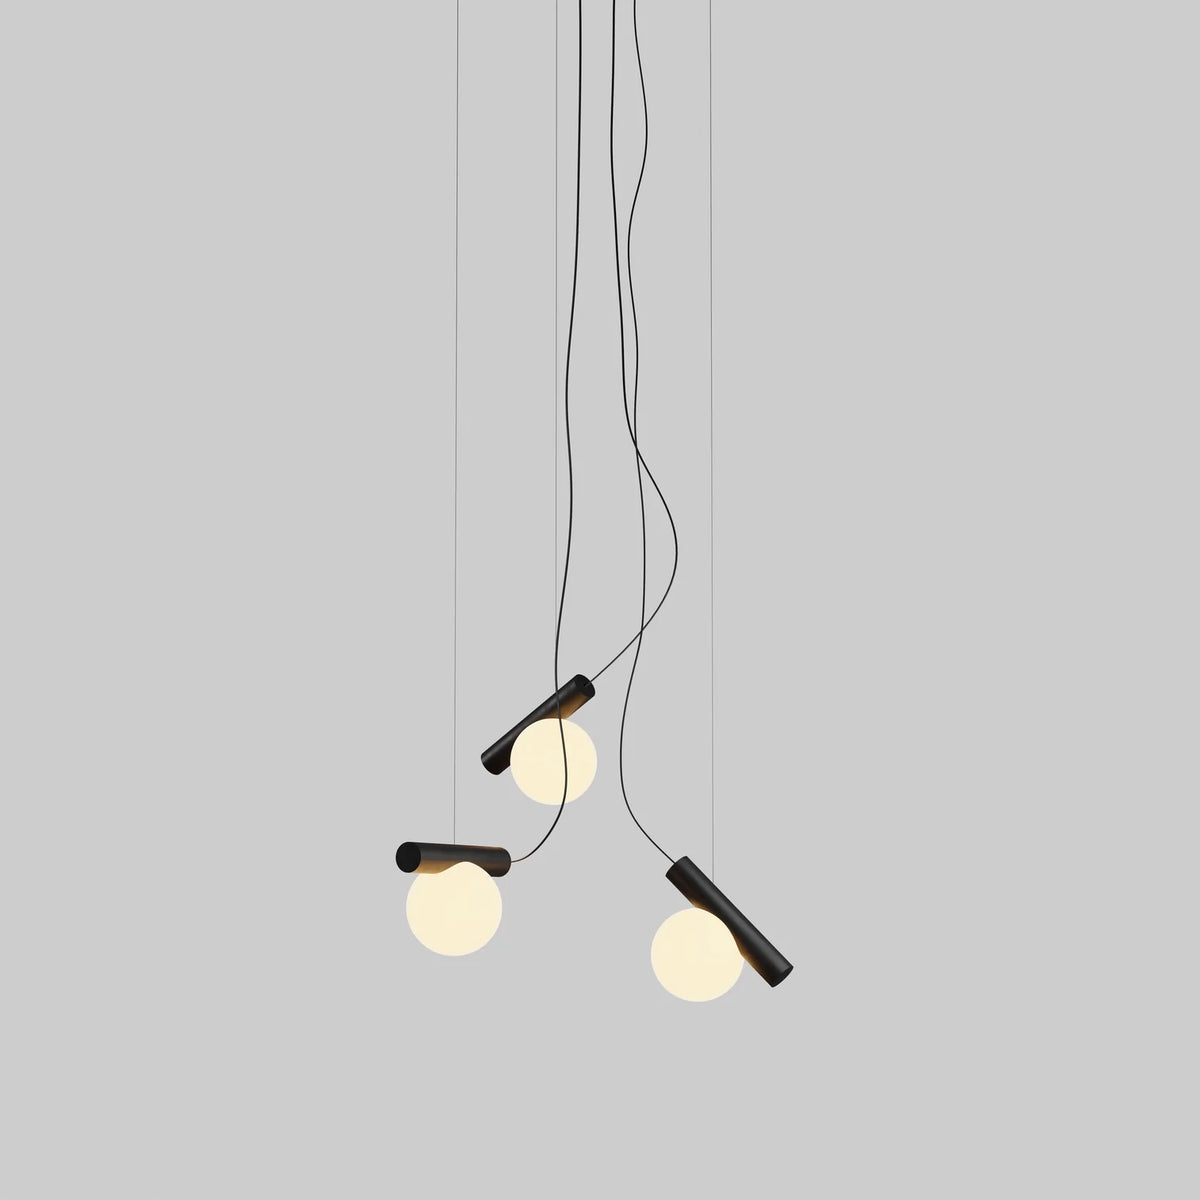 Node. Chandelier by Anony